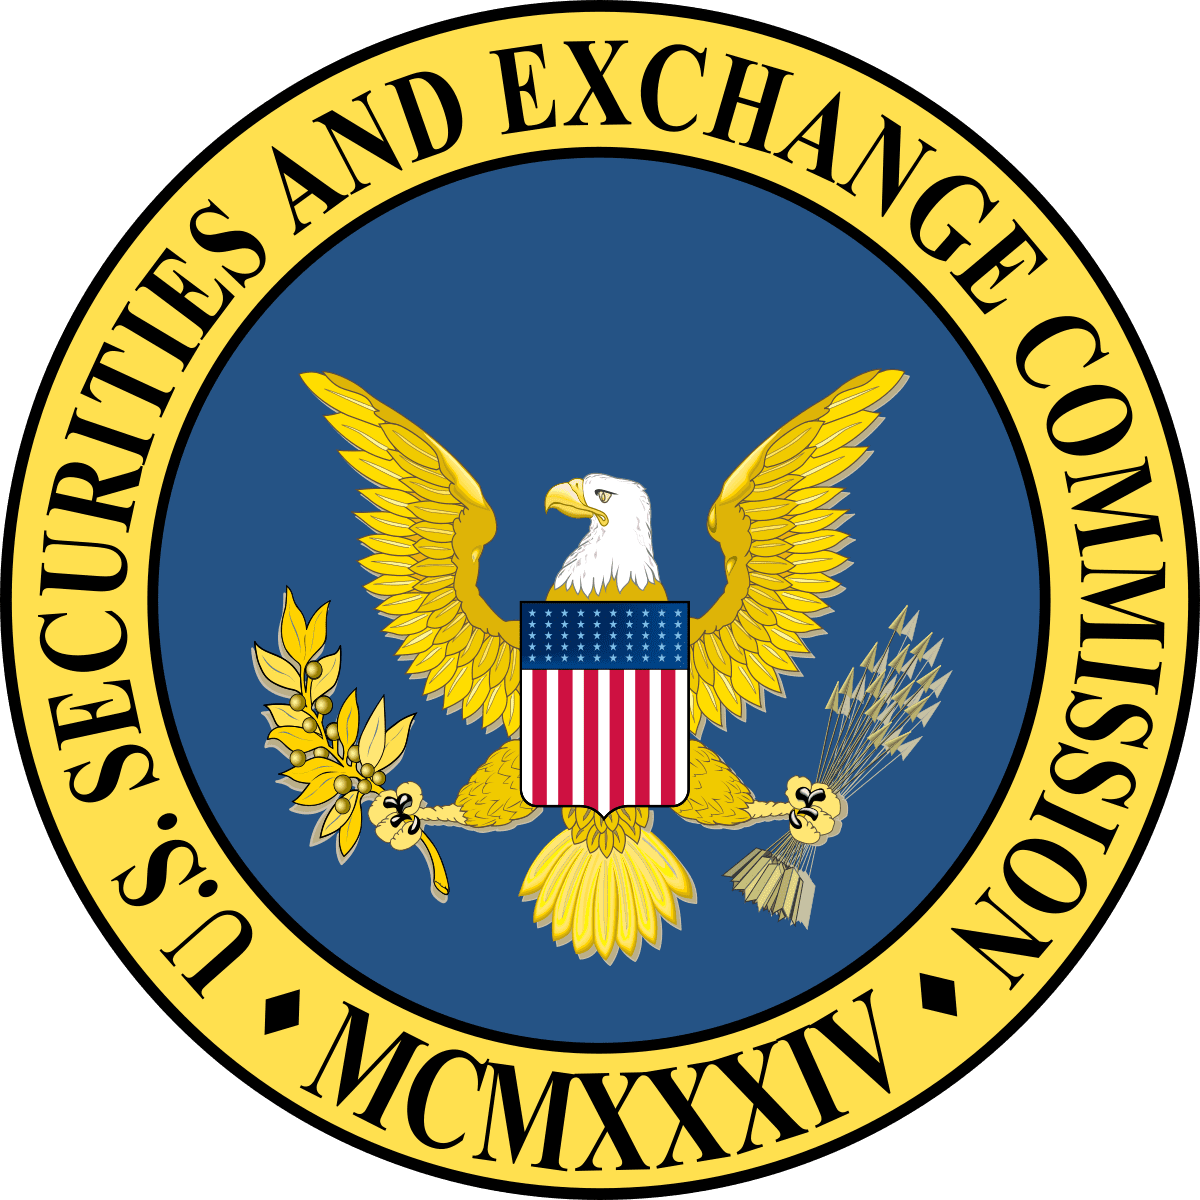 What actions can the SEC take?